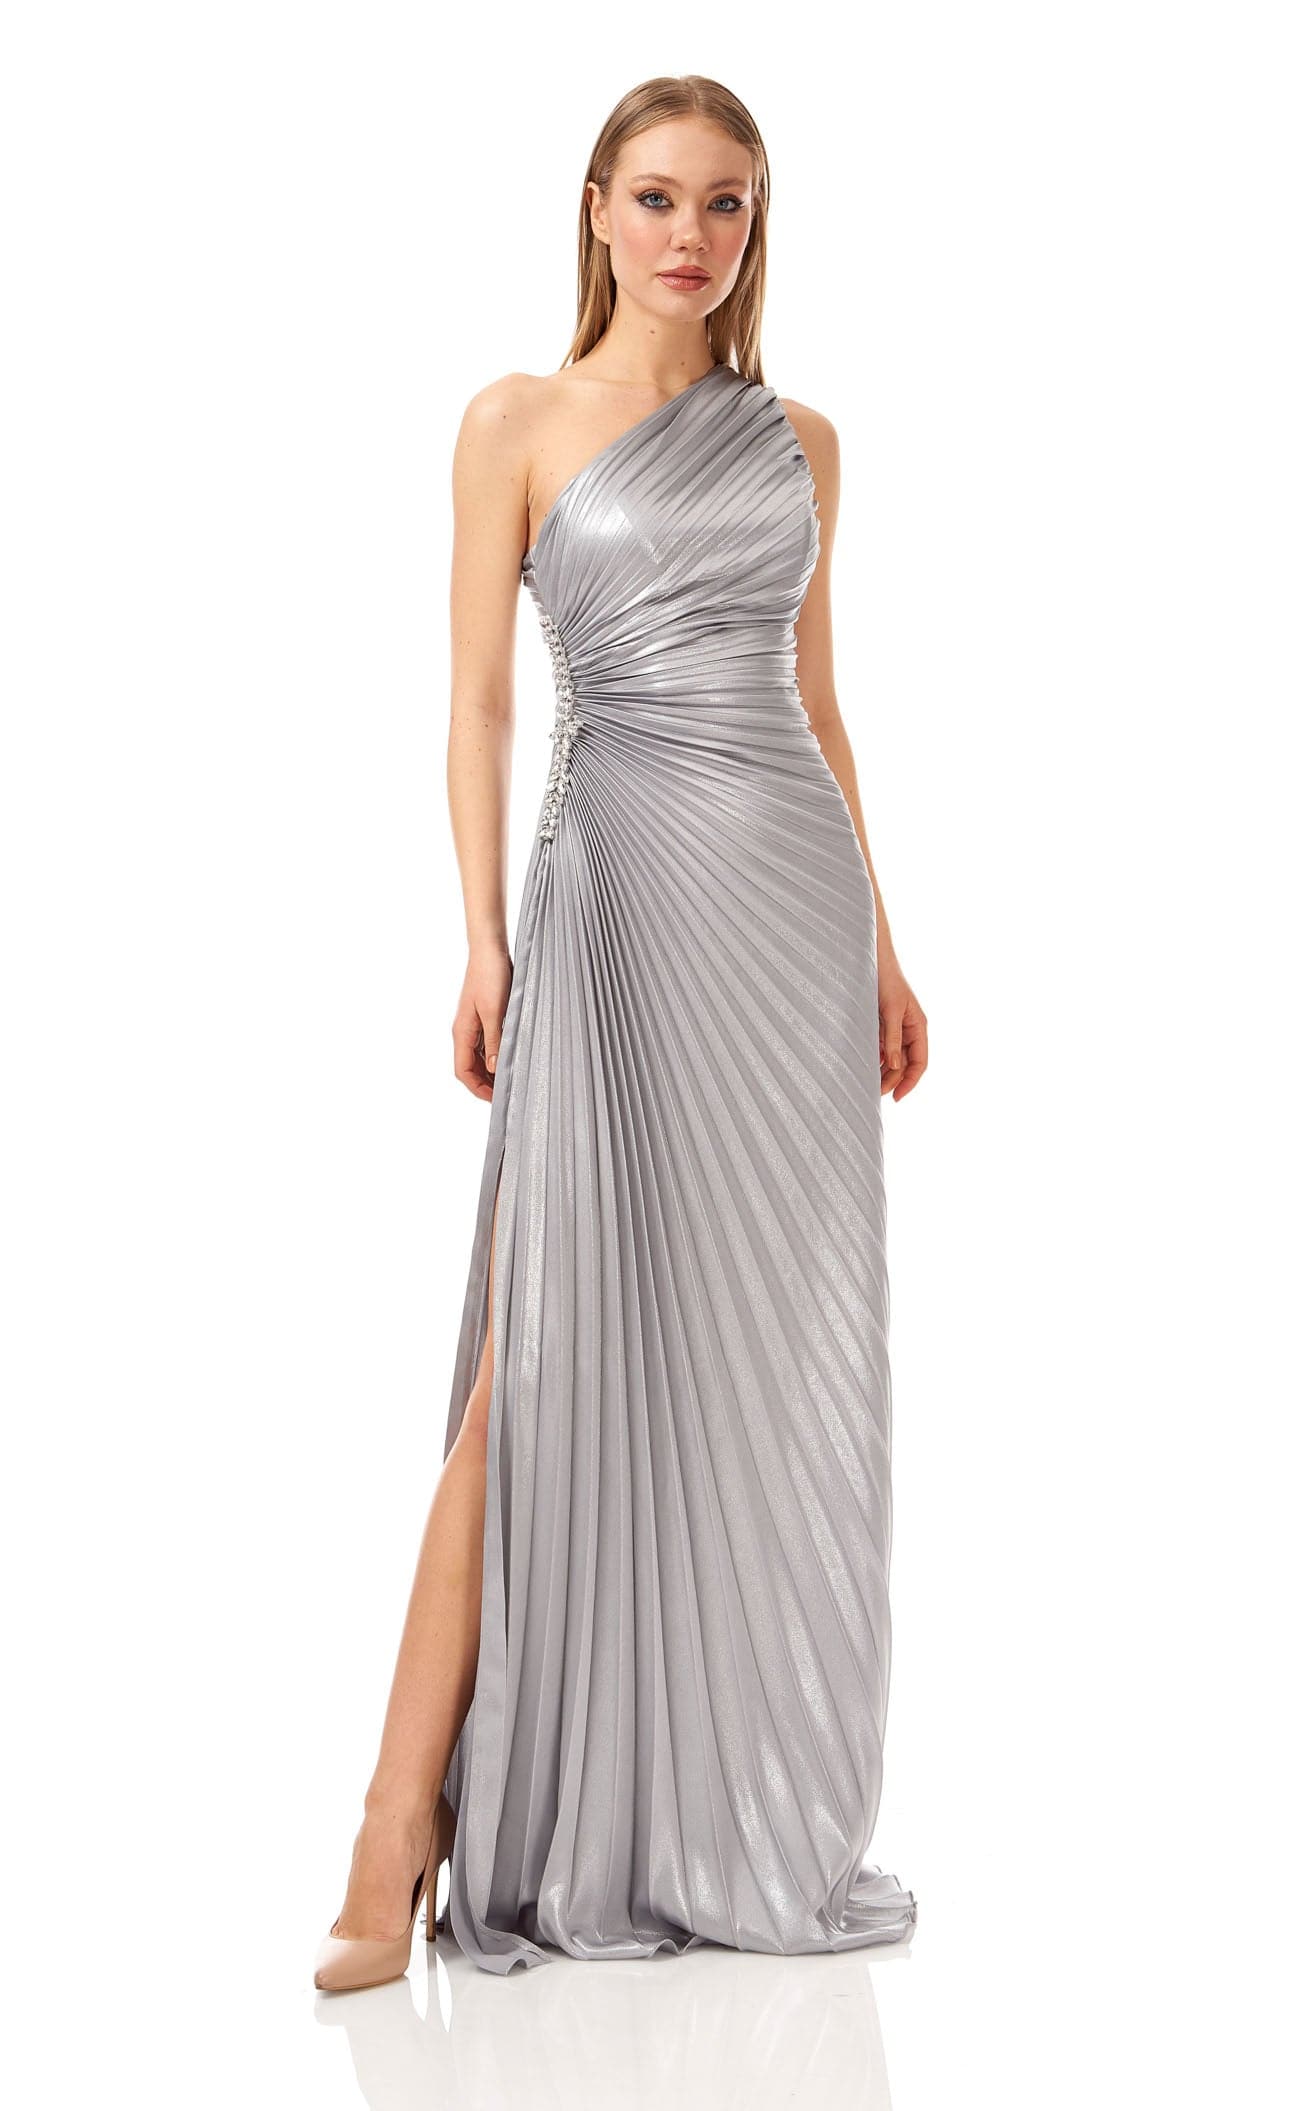 Silver Designer Dress for Any Occasion